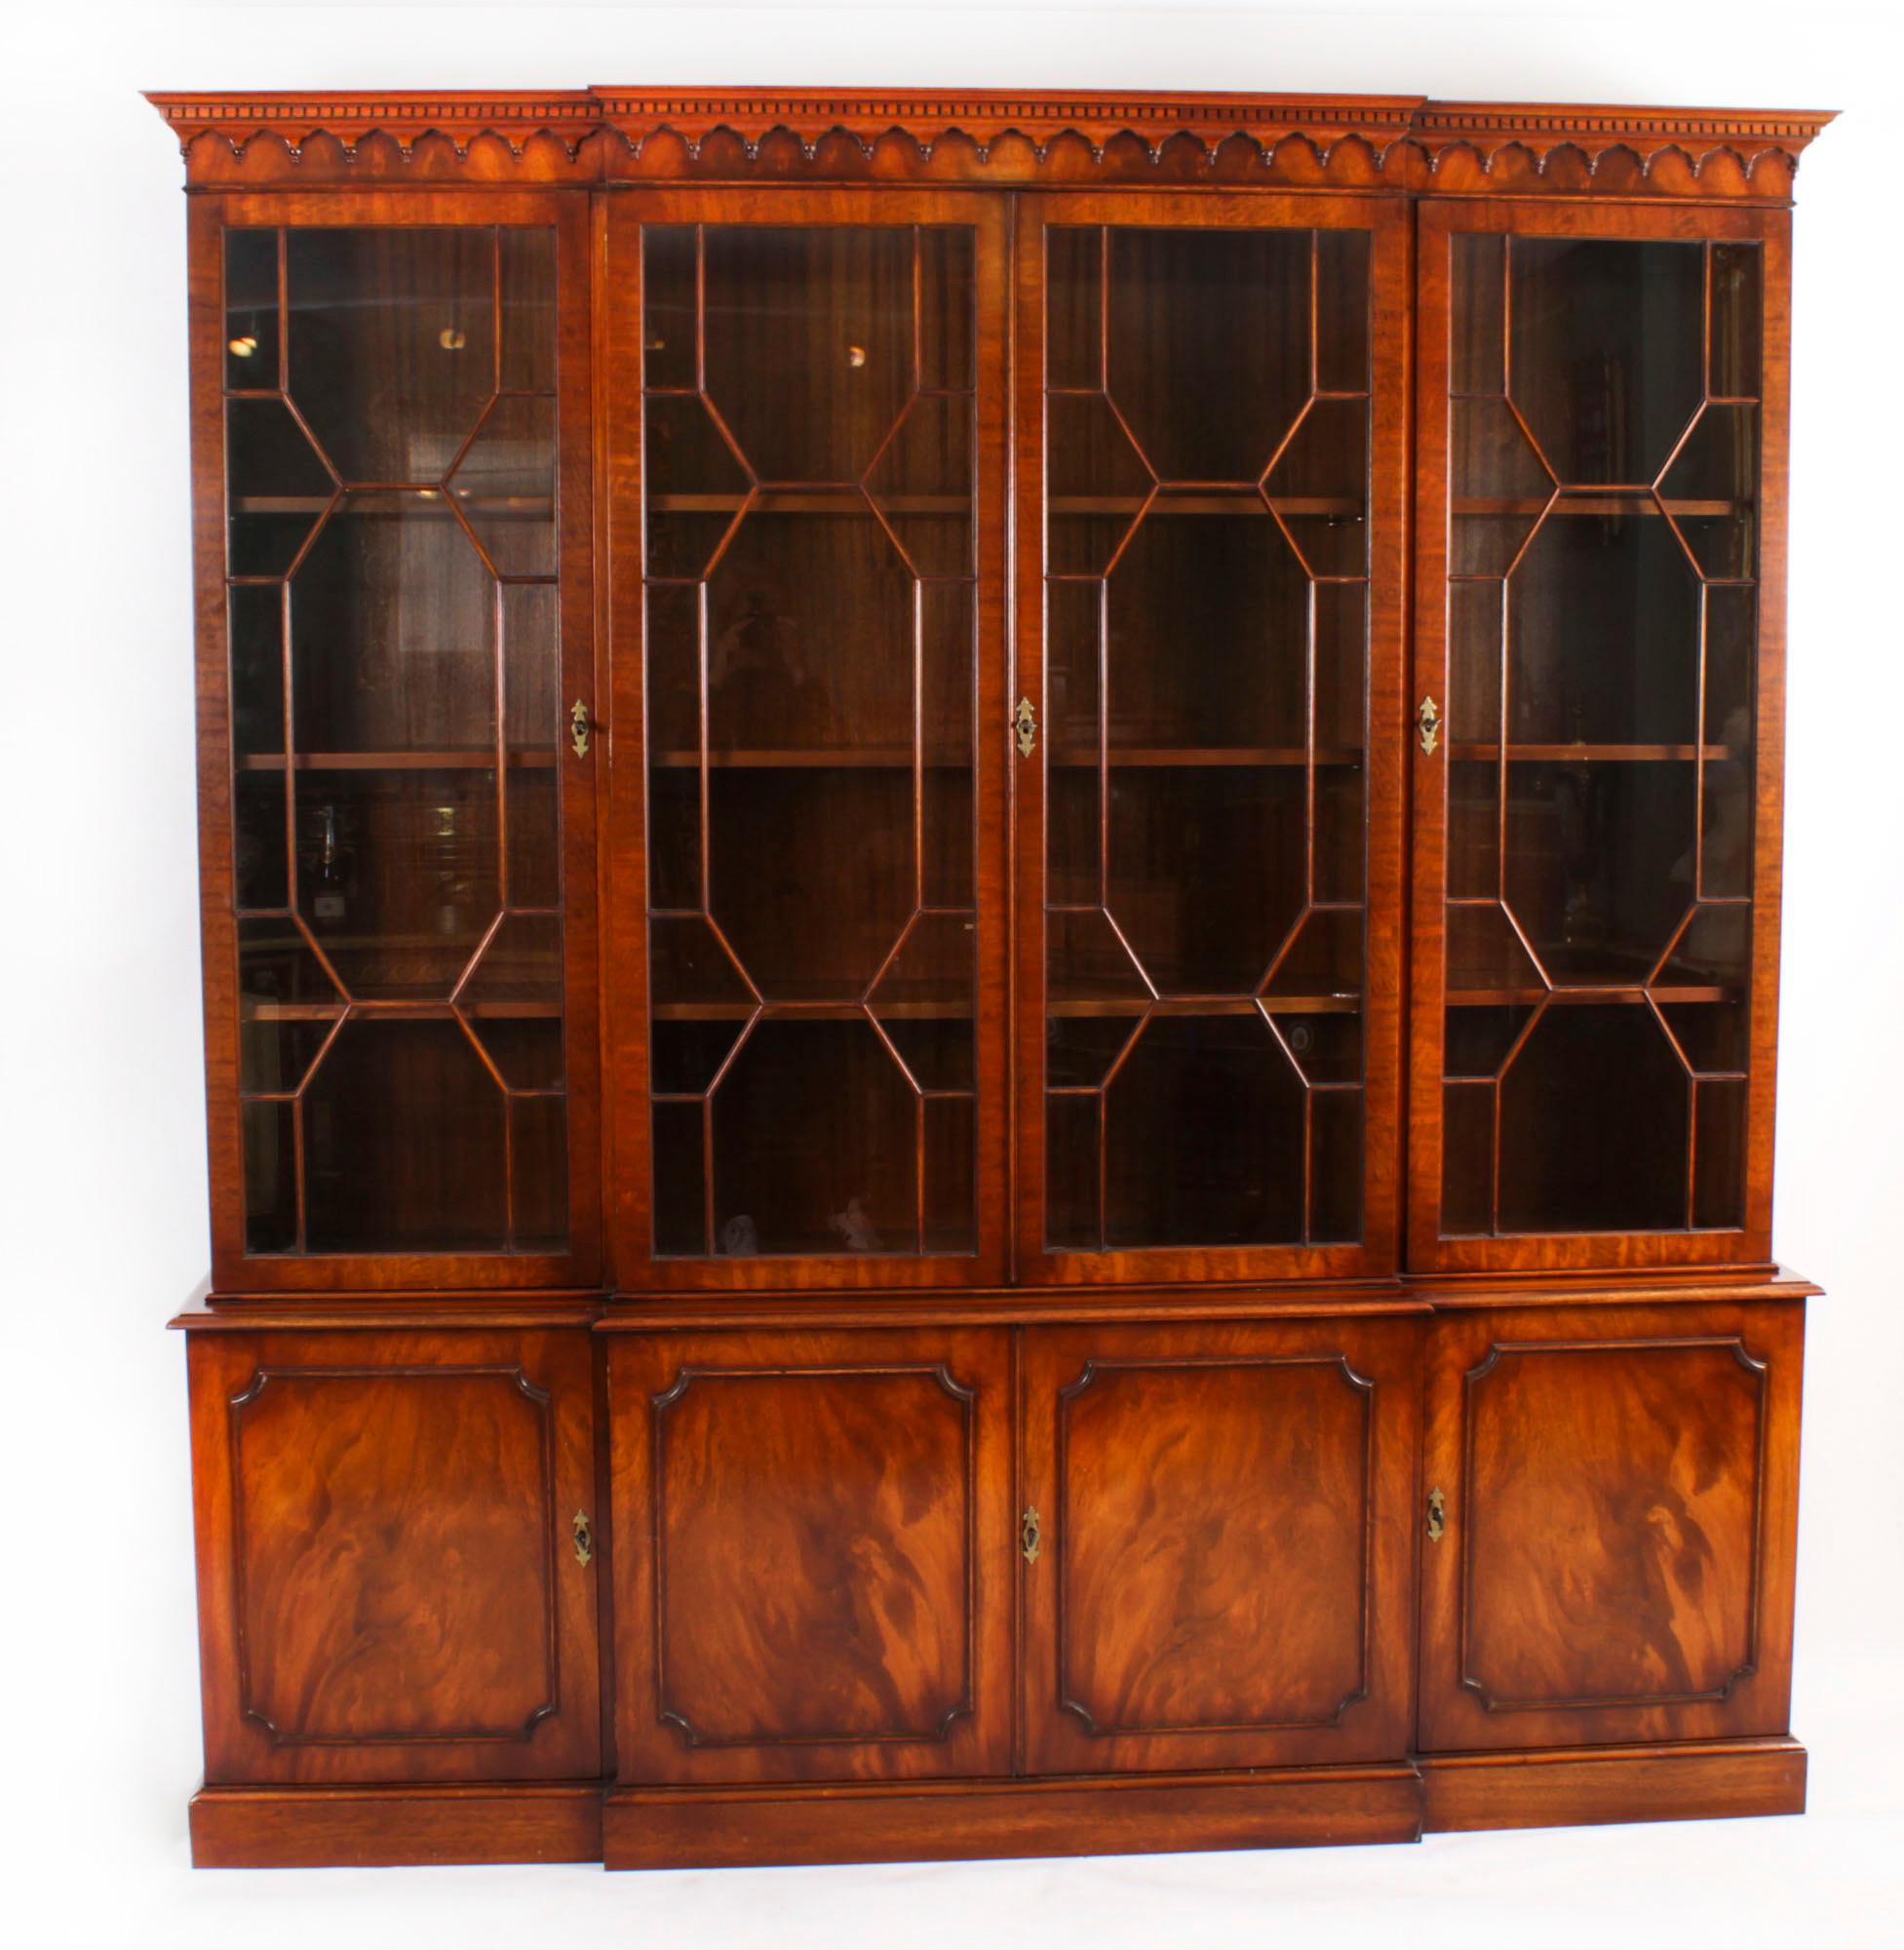 A delightful Vintage flame mahogany Georgian Revival library breakfront bookcase, dating from the mid 20th Century.

The top features a moulded cornice with a dental and arcaded frieze. The four astragal glazed doors open to reveal three adjustable